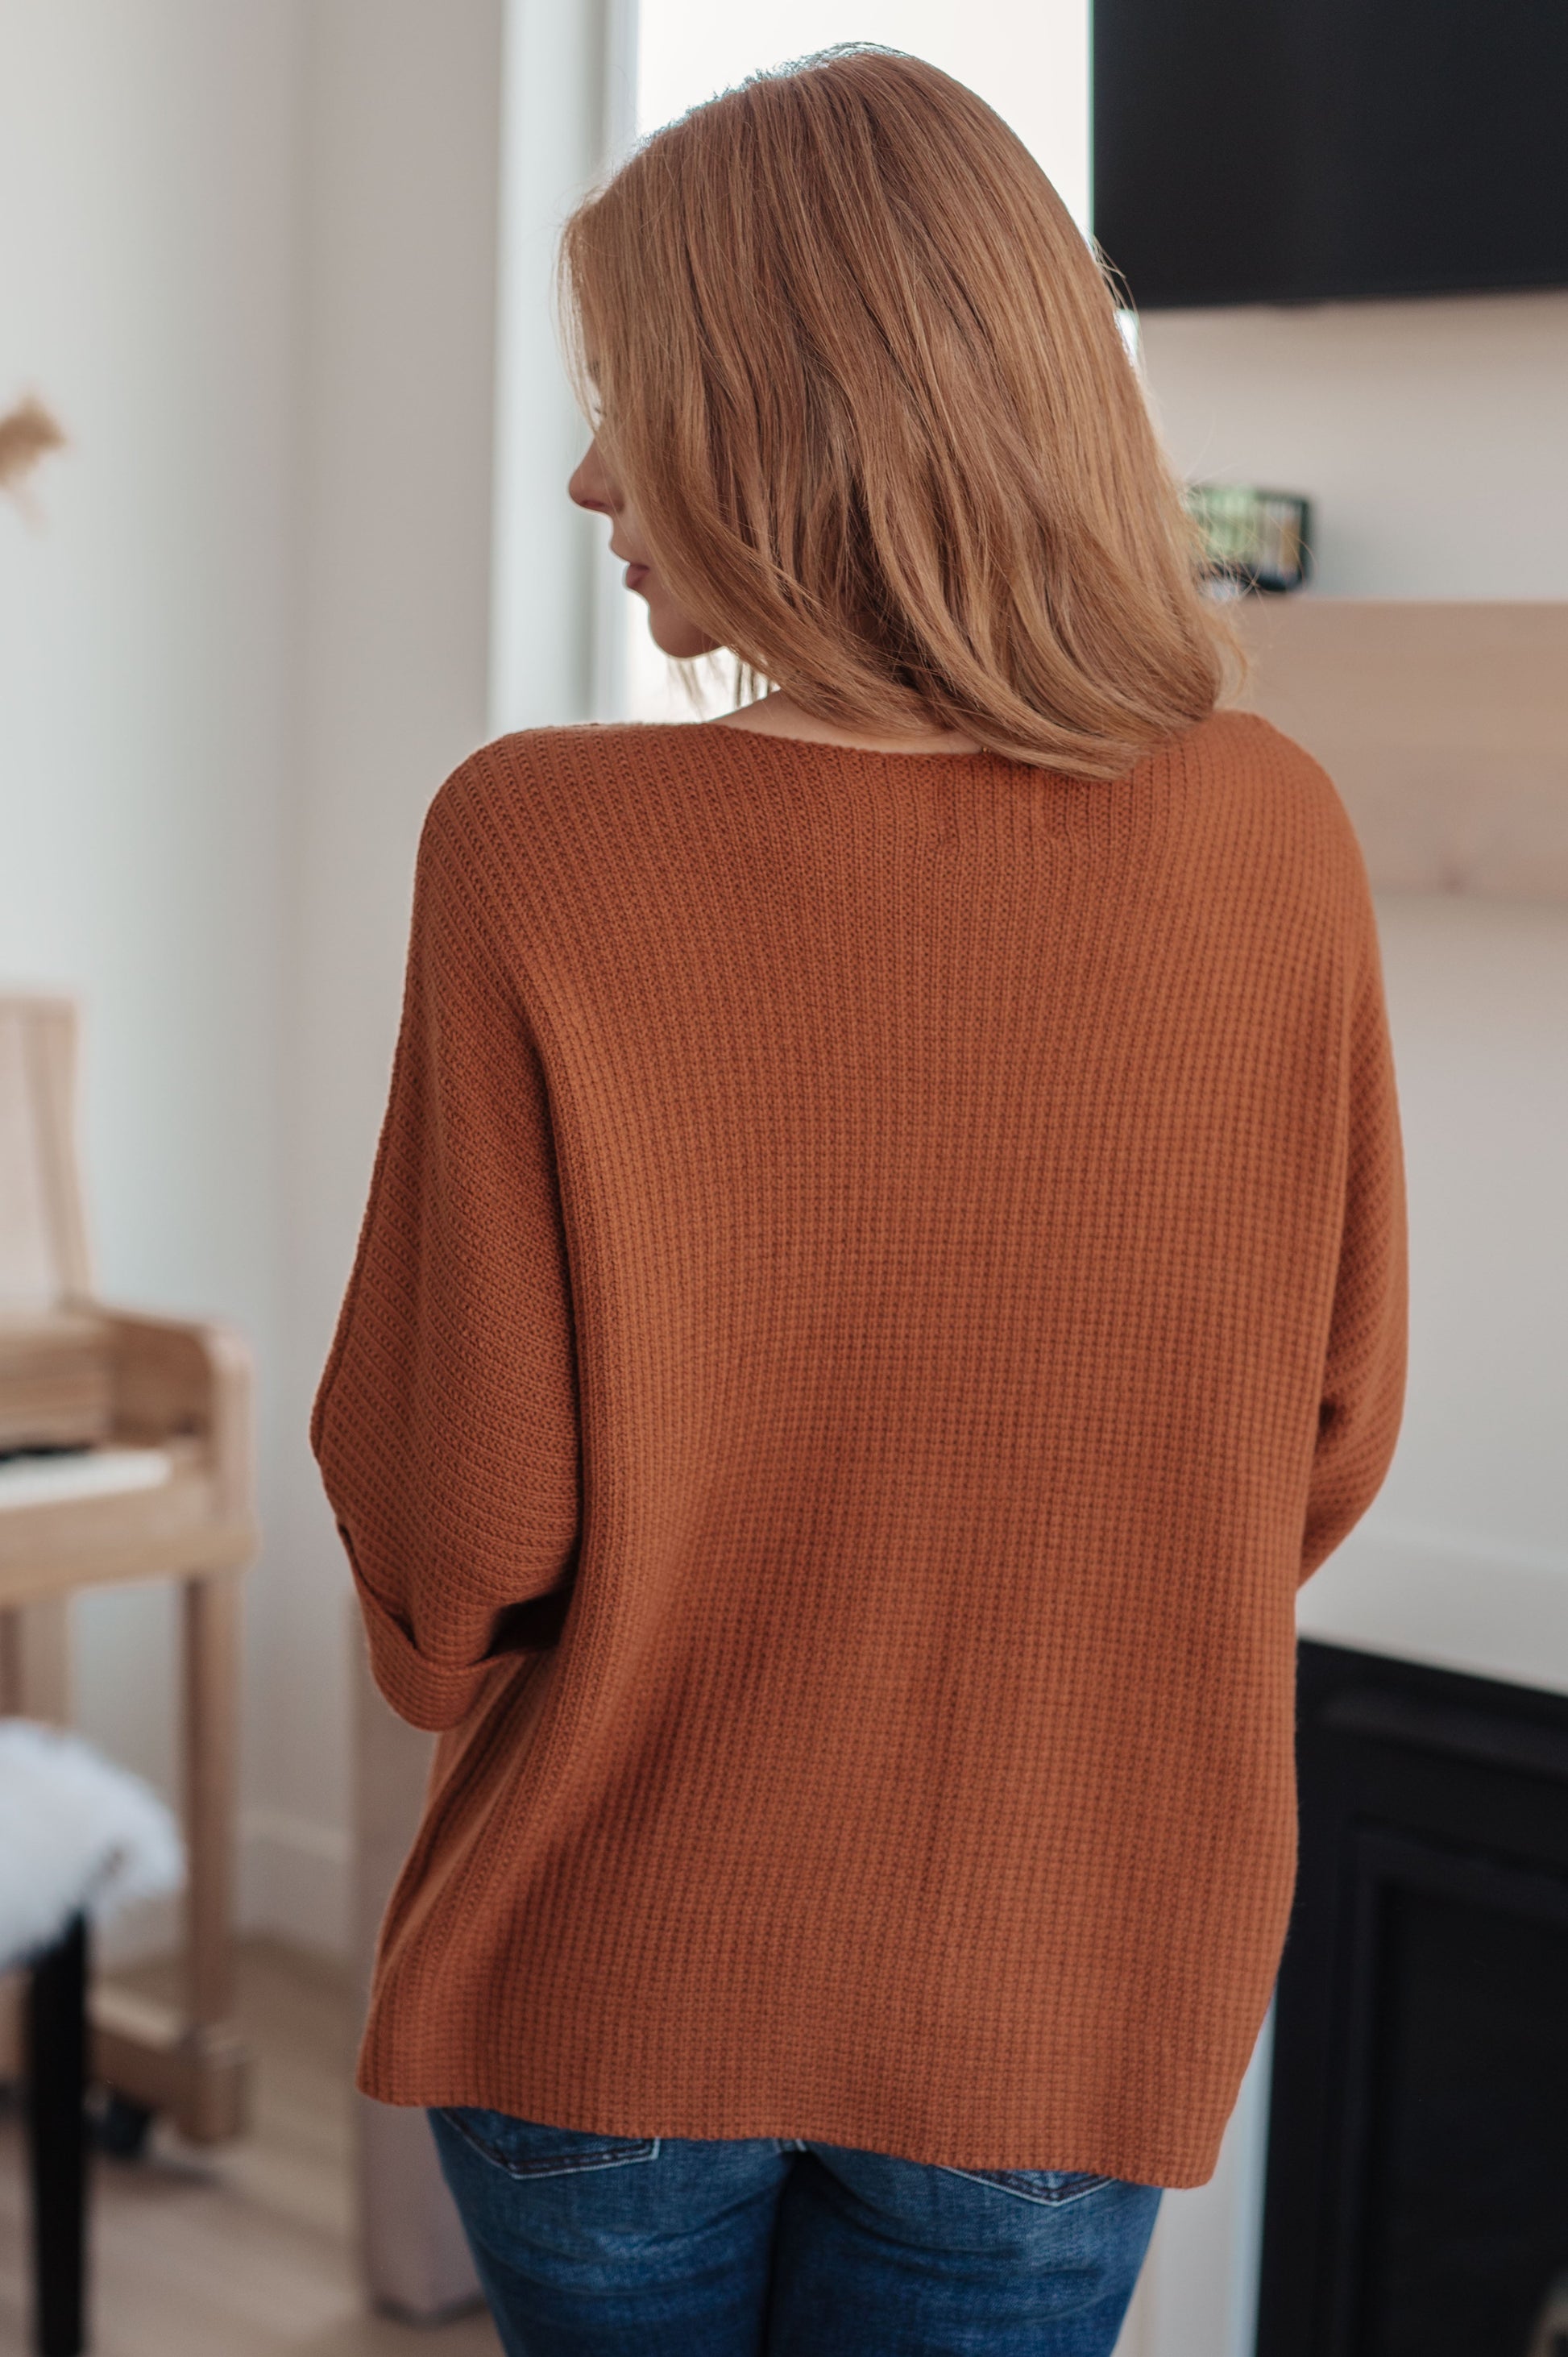 Lotta Love Knitted Sweater Top in Rust - Three Bears Boutique